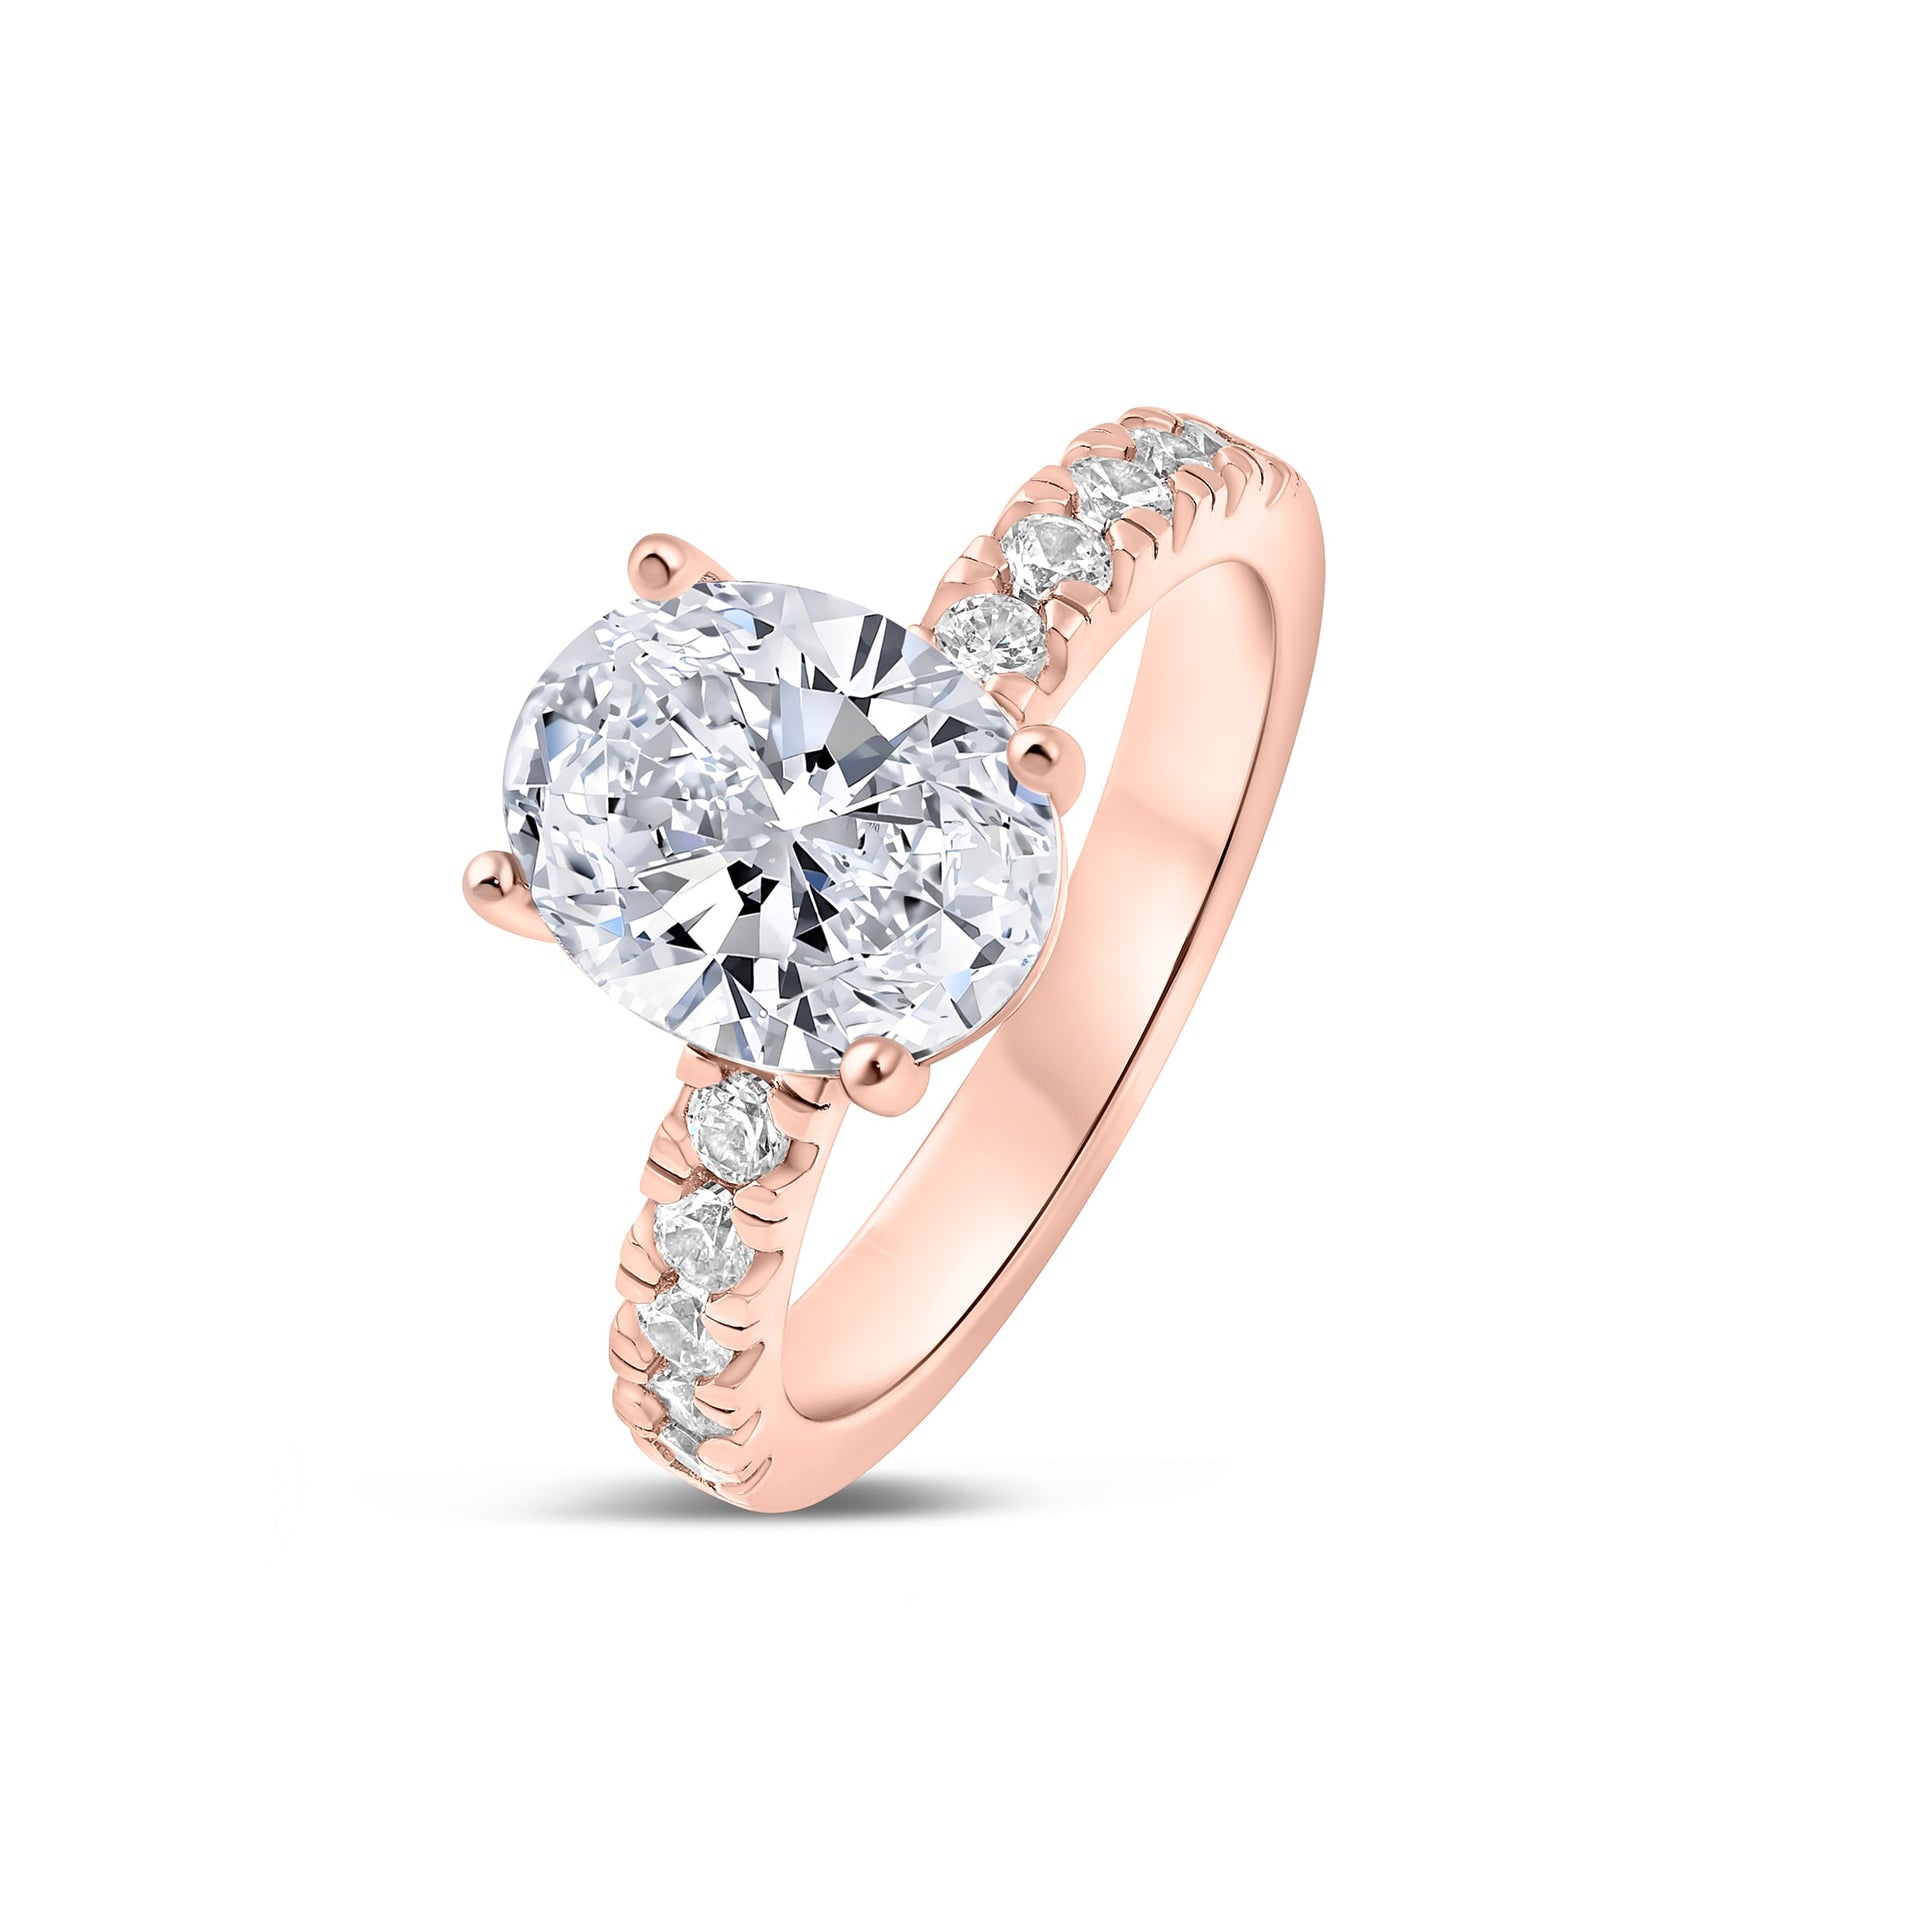 rose gold 3 carat oval cut engagement ring with half eternity band detailing